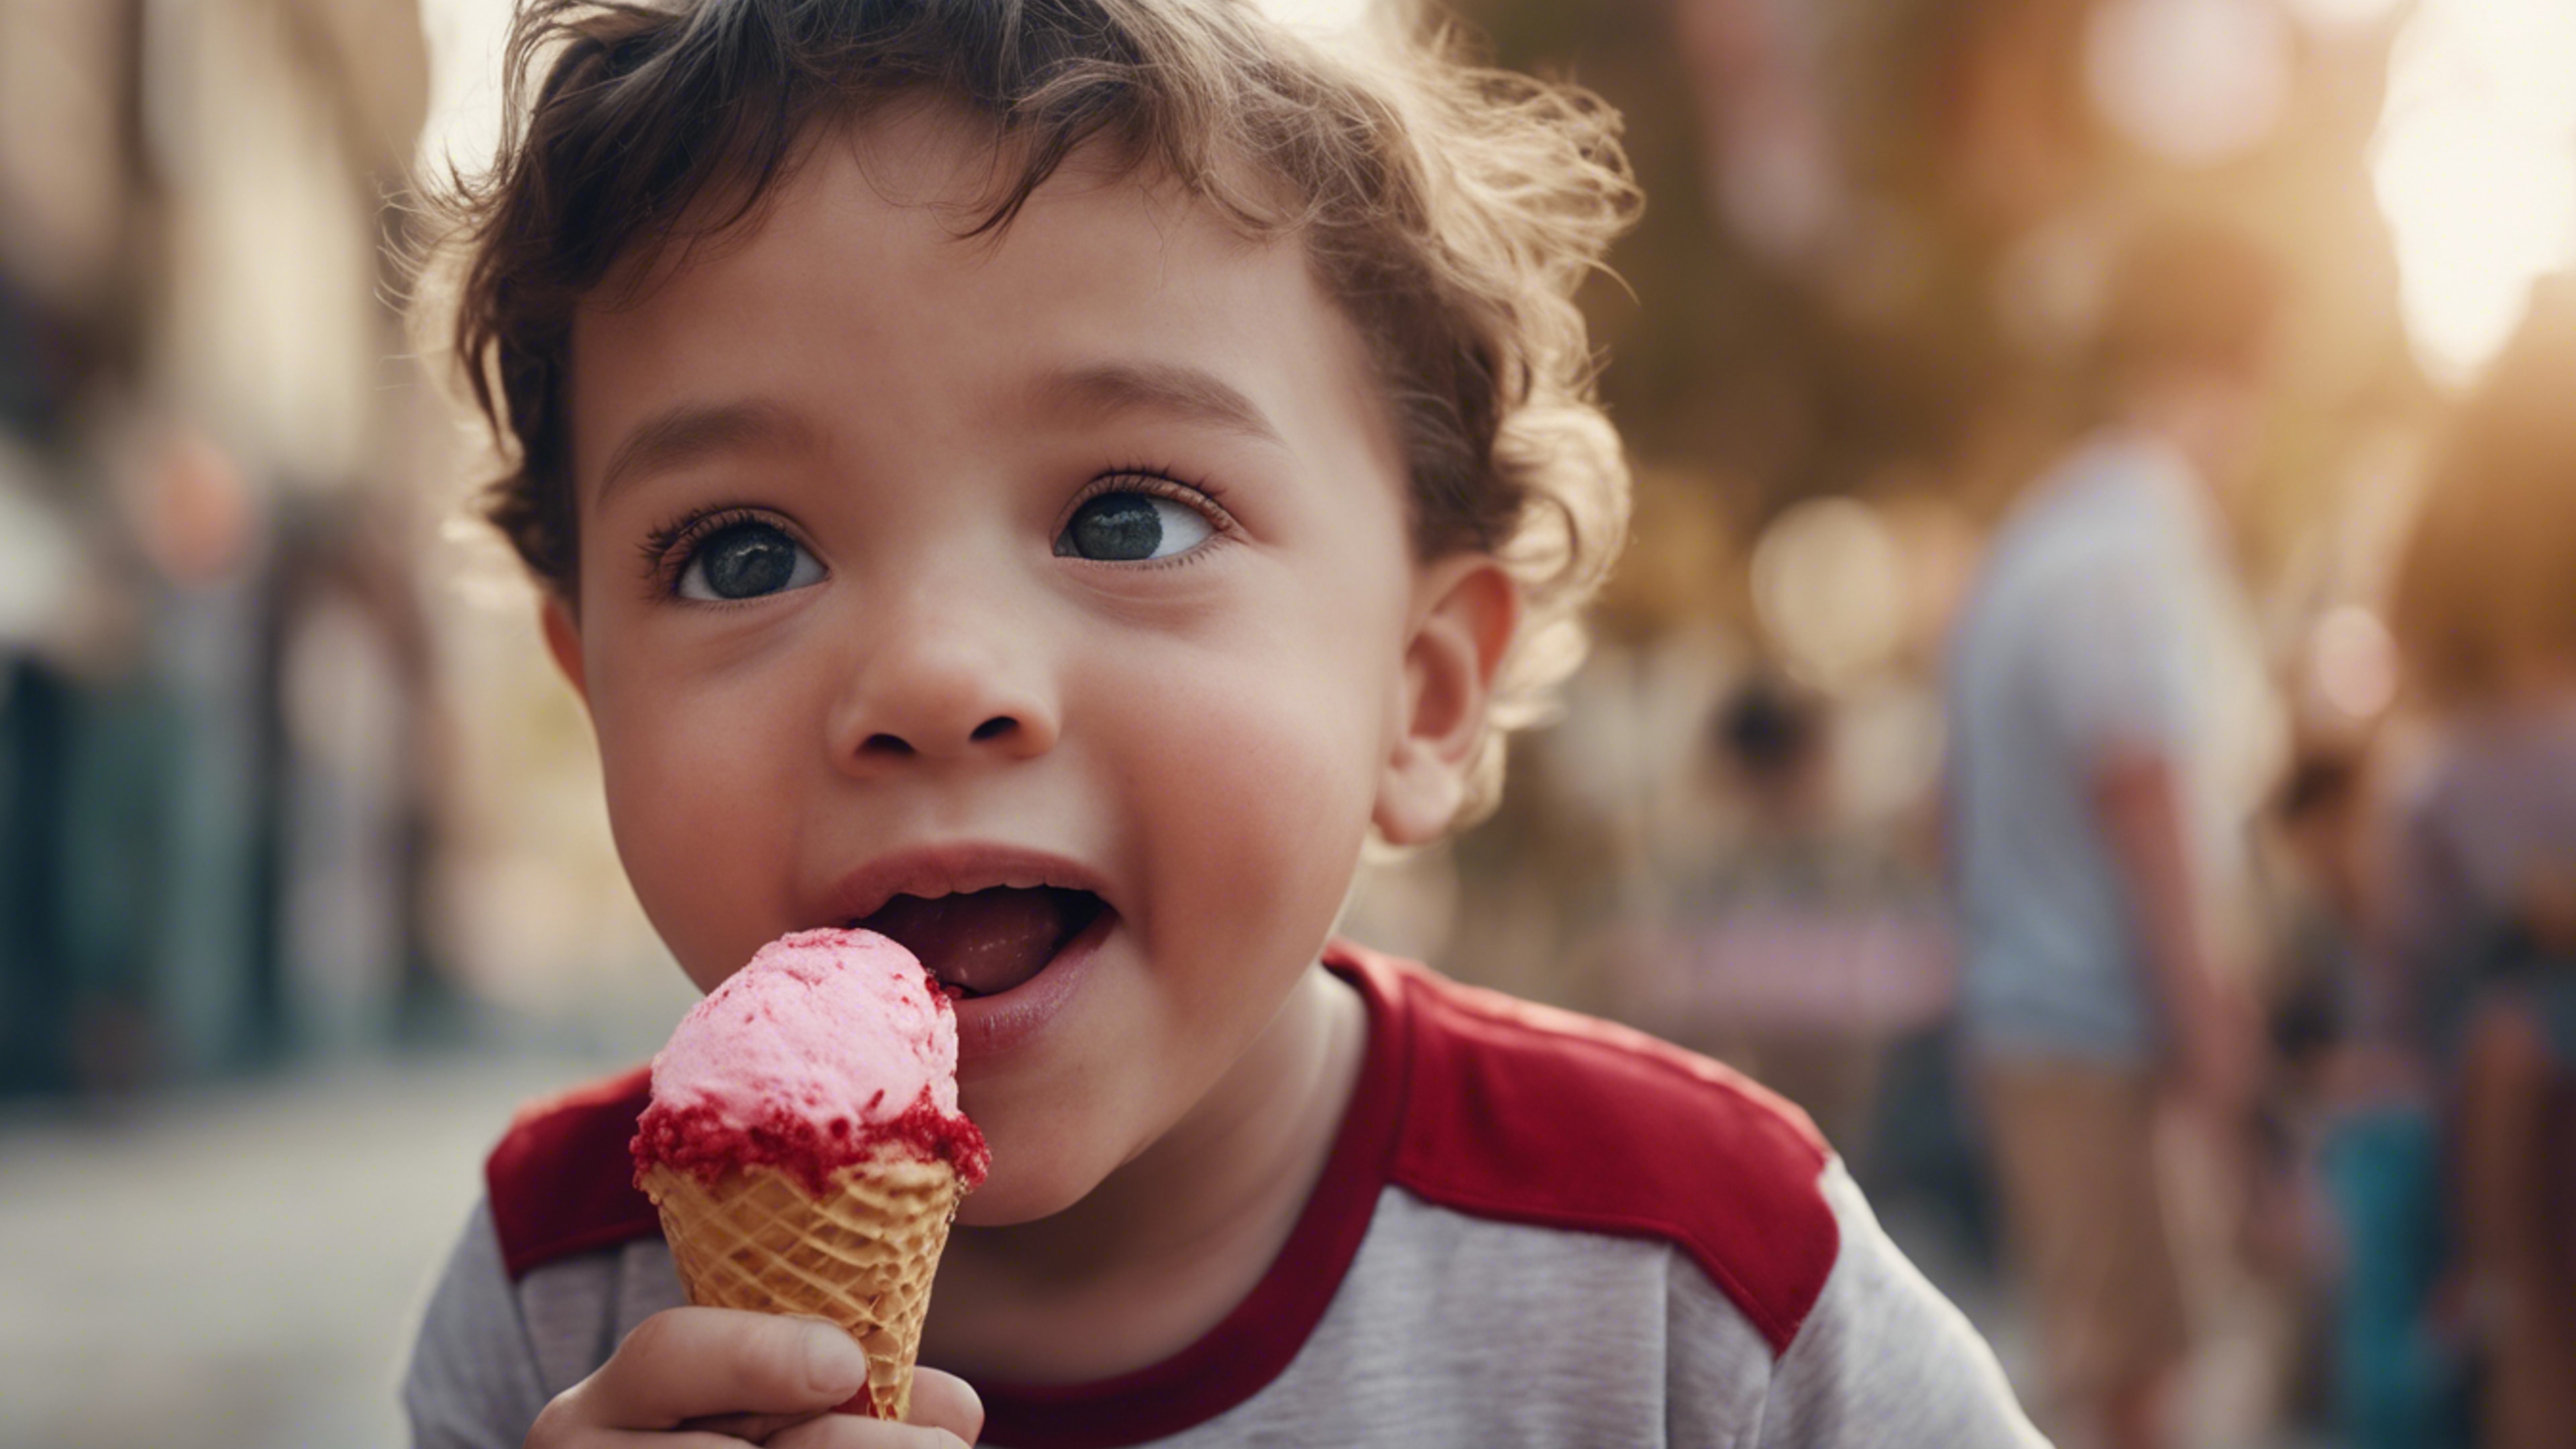 A small child delighting in a red velvet ice cream cone, with a wide-eyed expression of joy on his face. วอลล์เปเปอร์[7a3fbd1e60614c42931f]